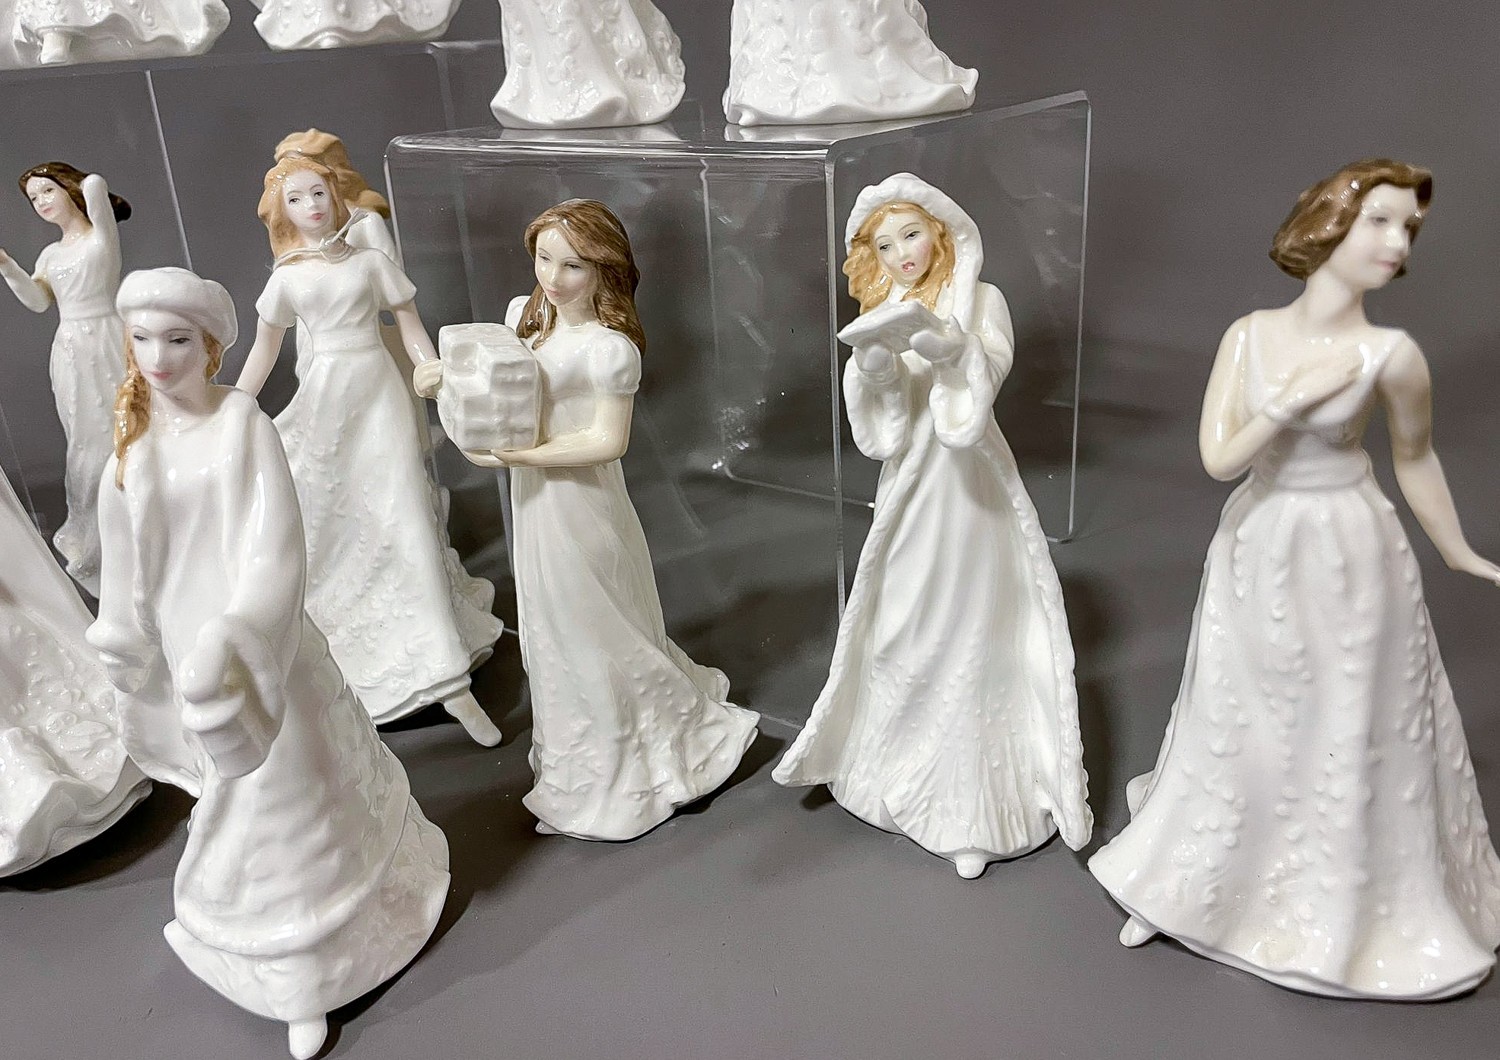 18 Royal Doulton figures from the Sentiments collection, each approx. 15 cm tall - Image 6 of 6